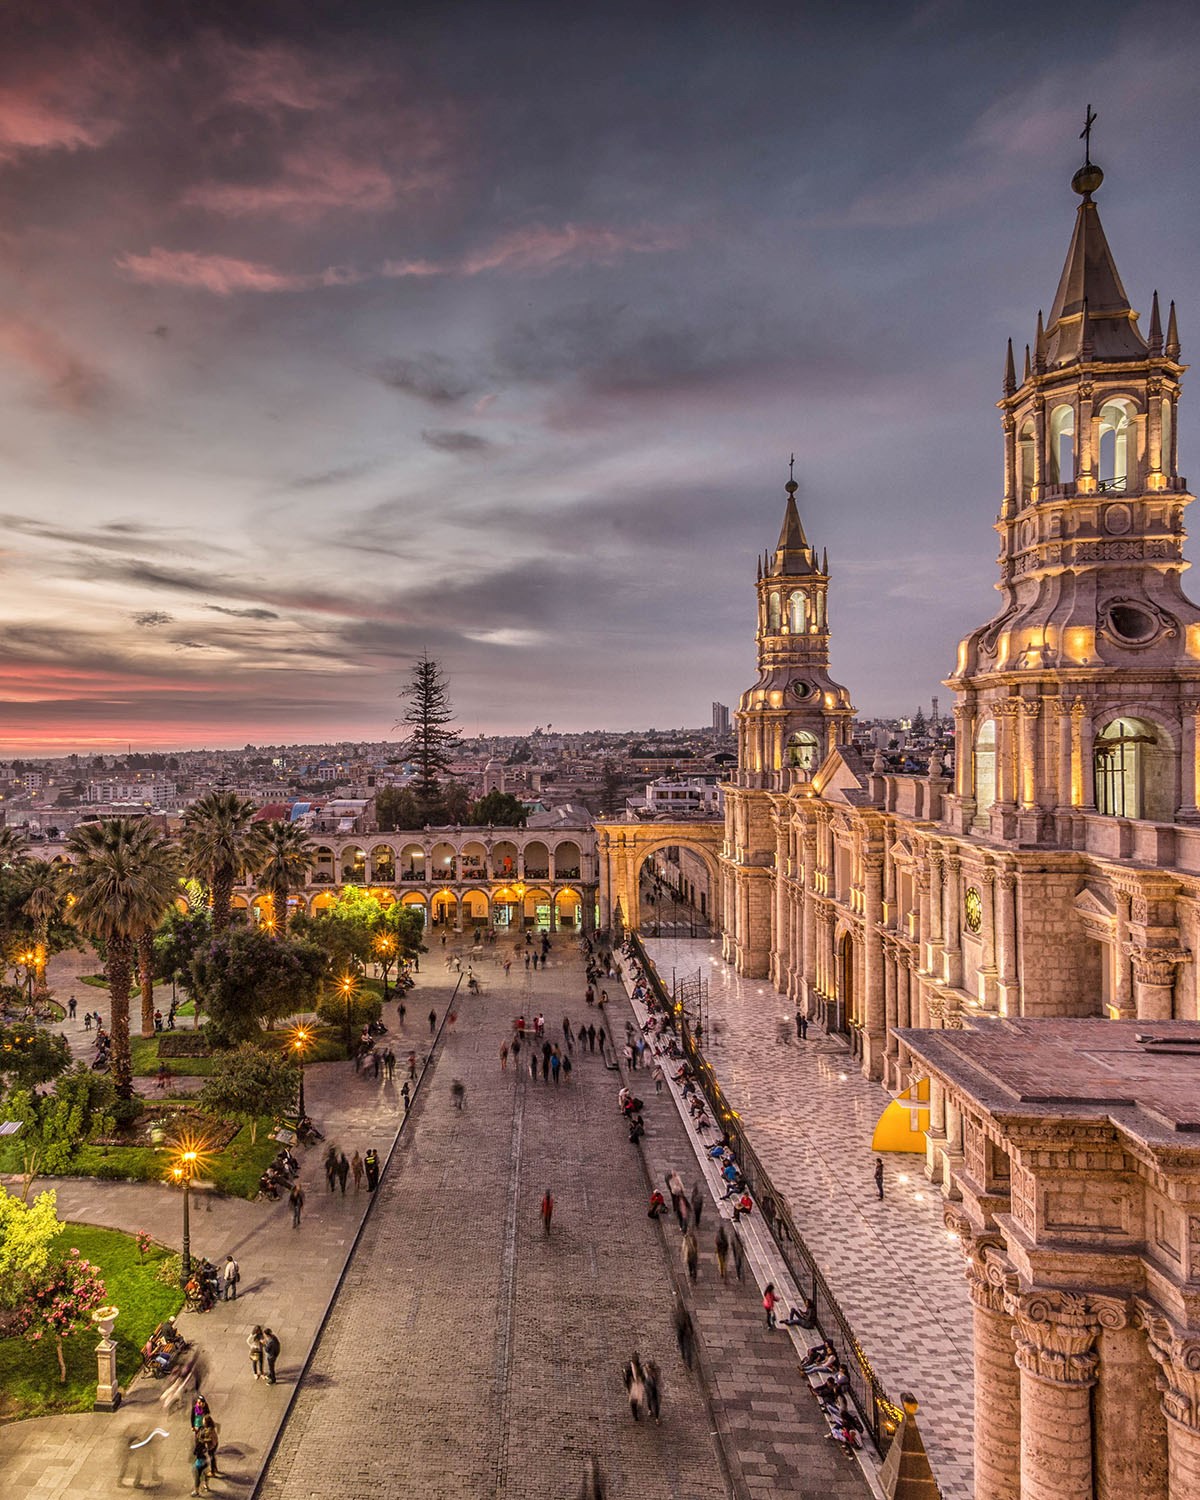 Arequipa's historical centre - 